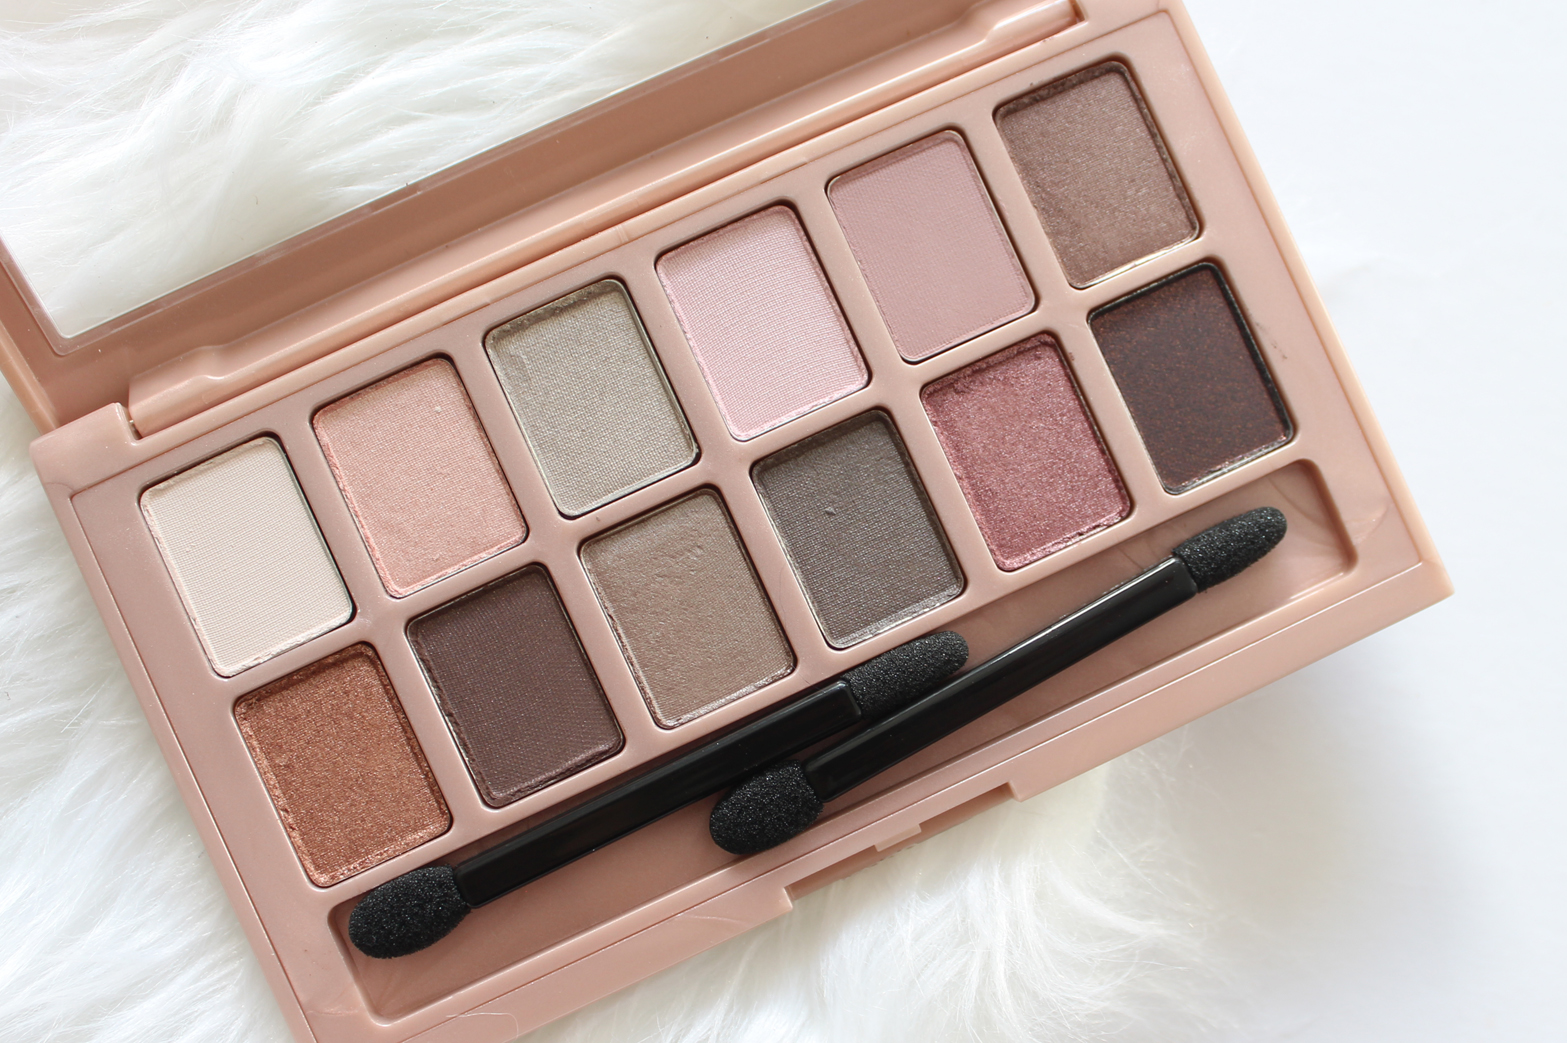 Huda beauty naughty nude eyeshadow palette review swatches